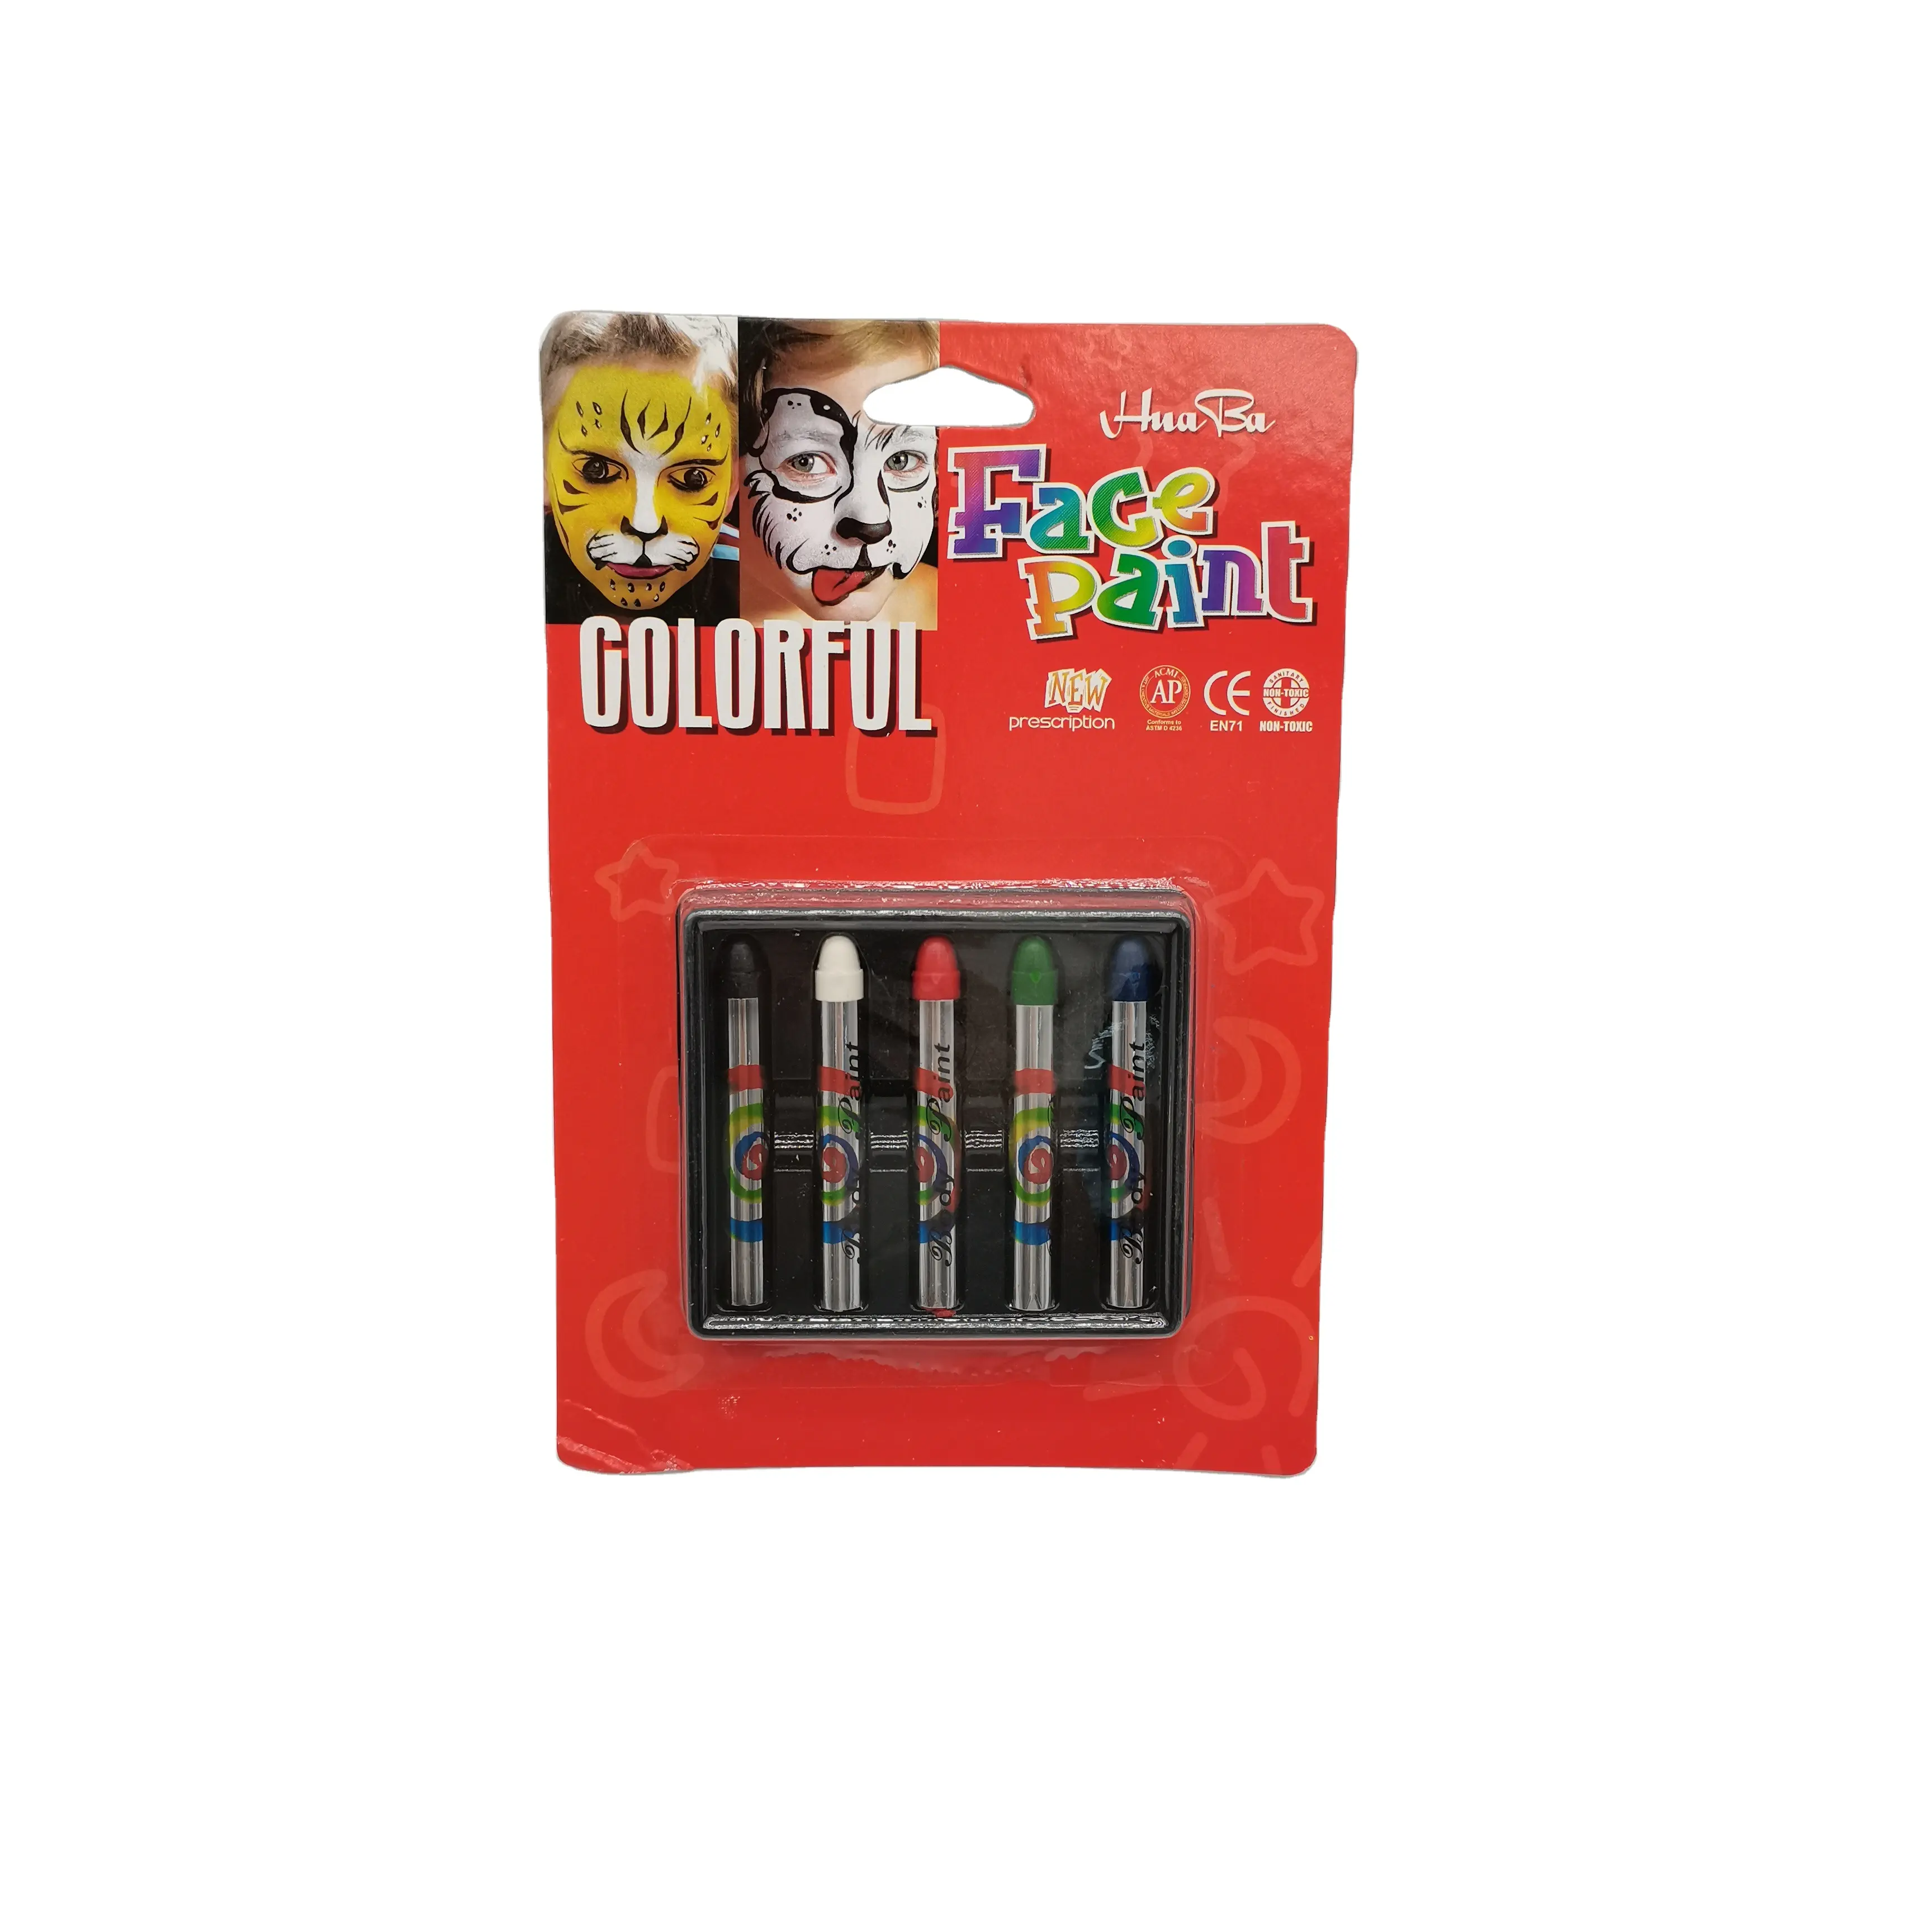 New style 5 colors water-based face paint pens flags face paint crayons for children